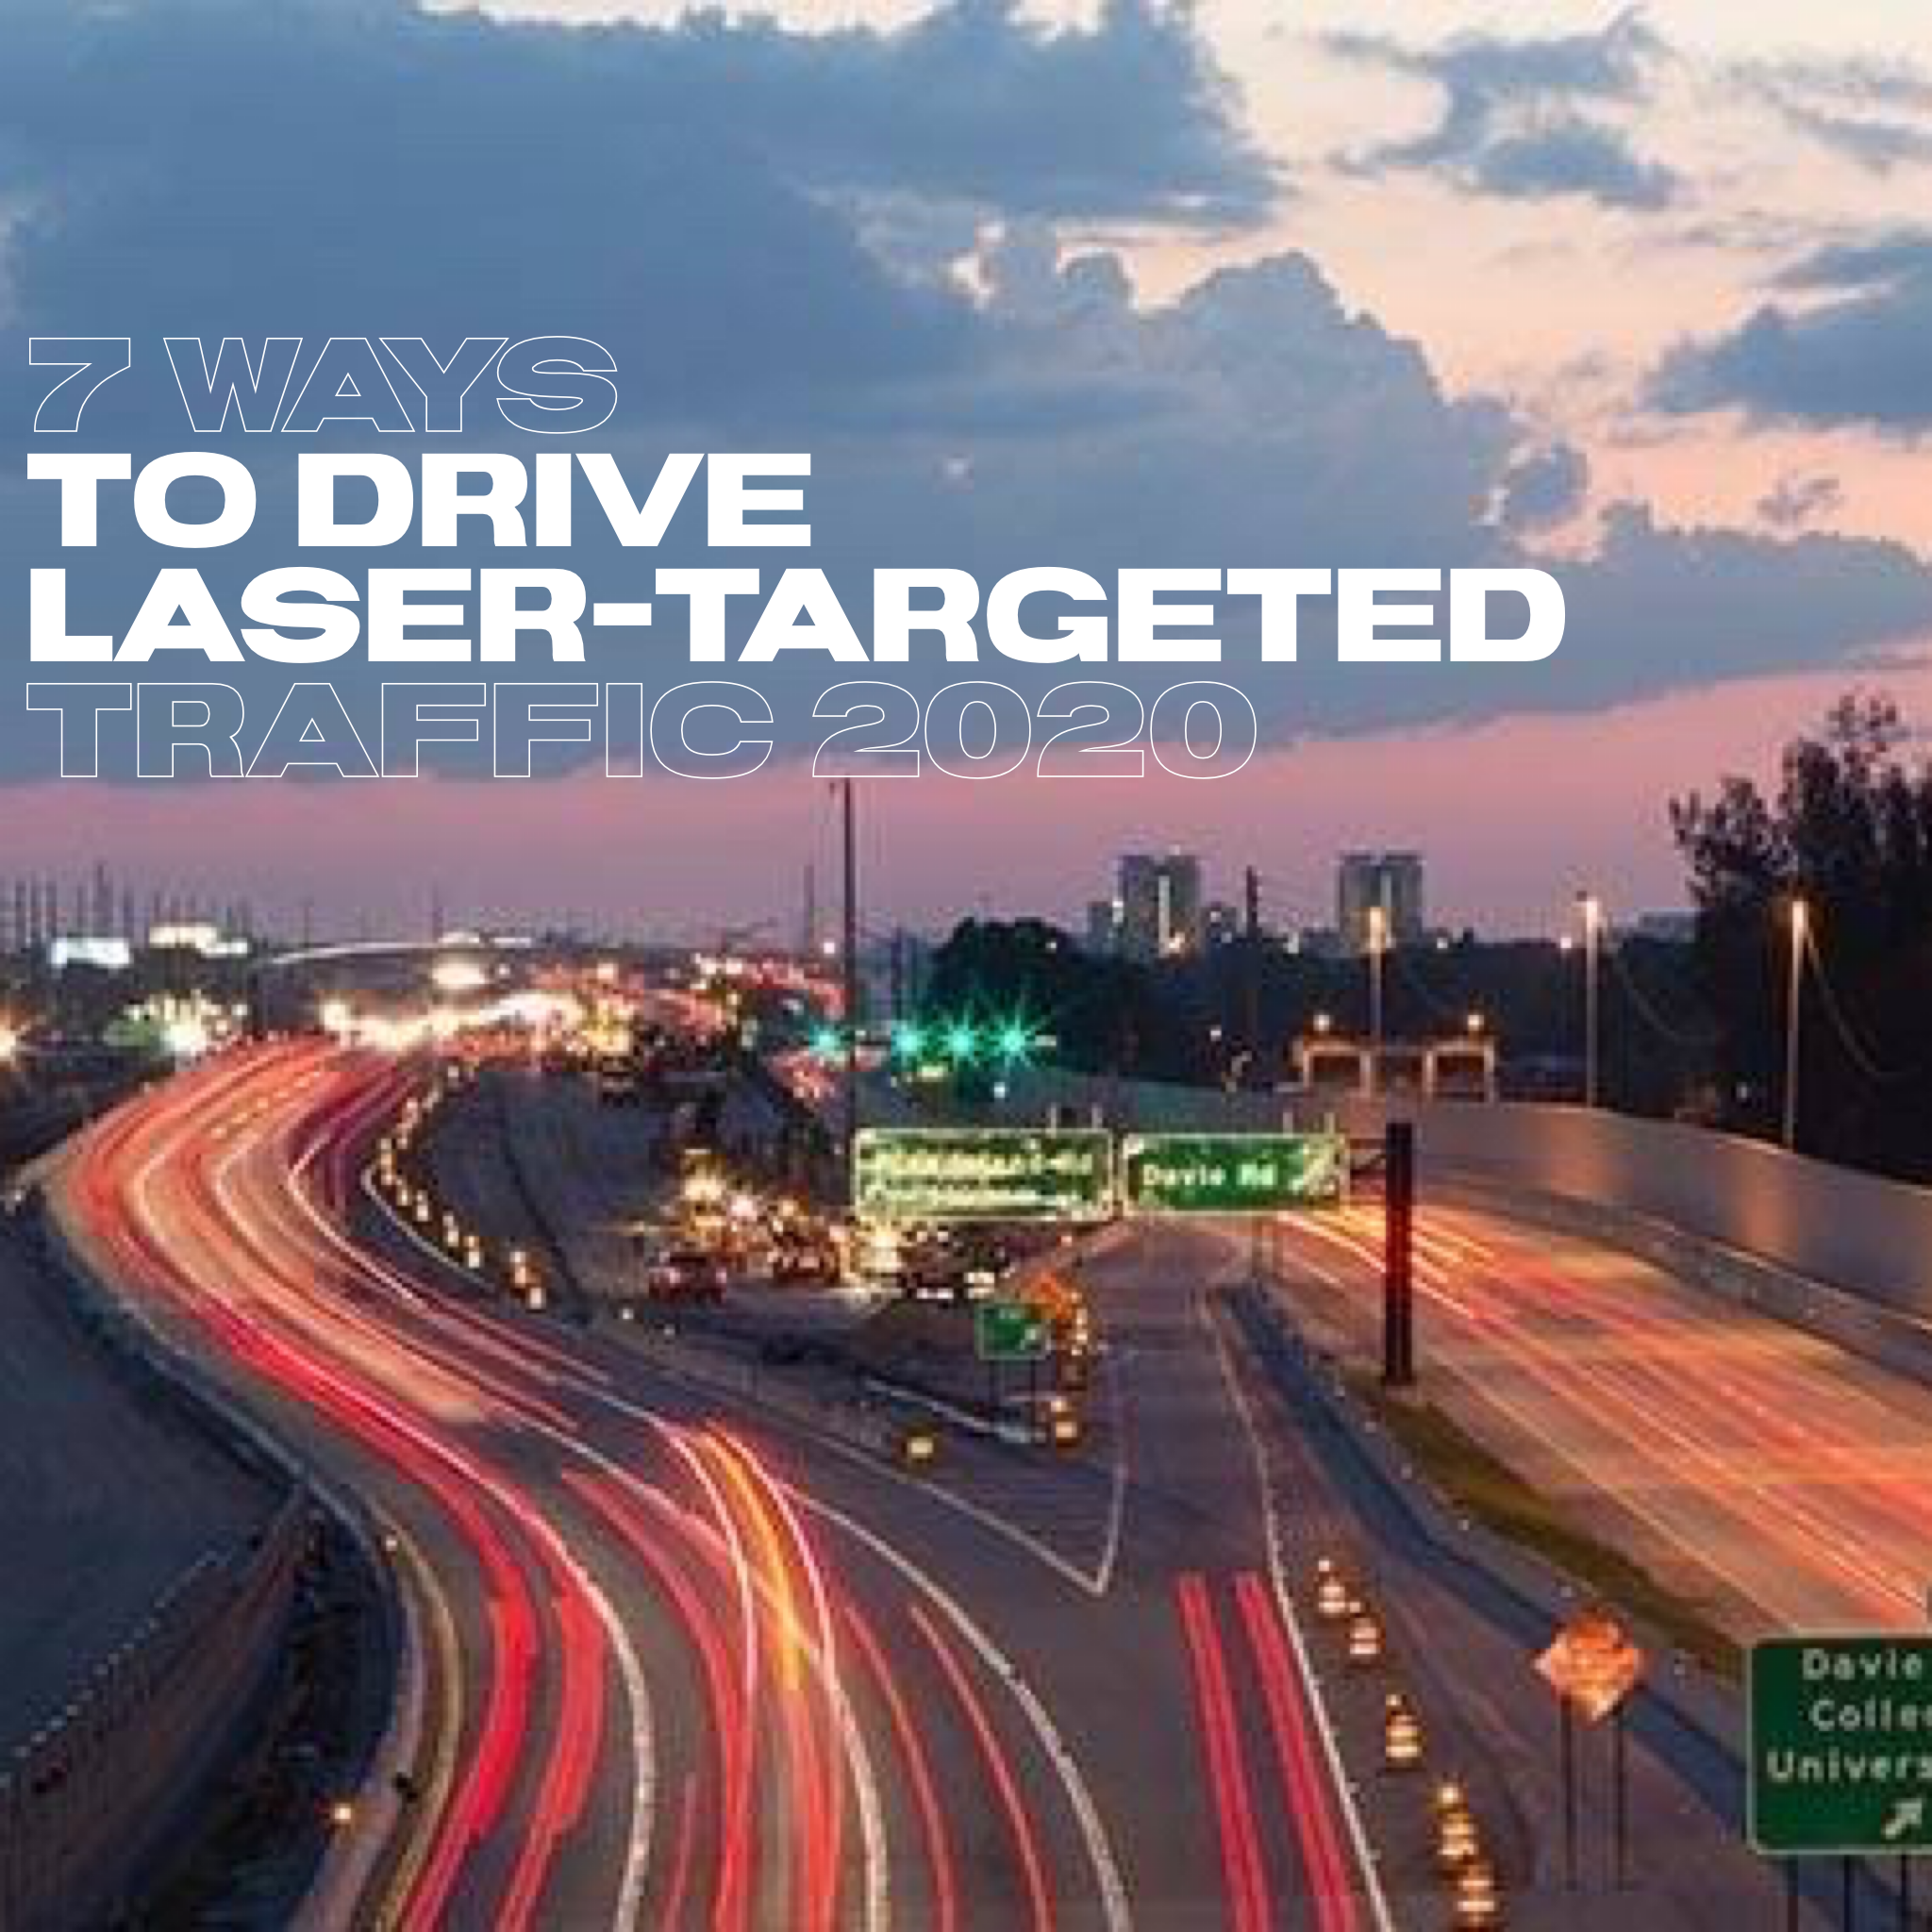 7 WAYS TO DRIVE LASER-TARGETED TRAFFIC 2020